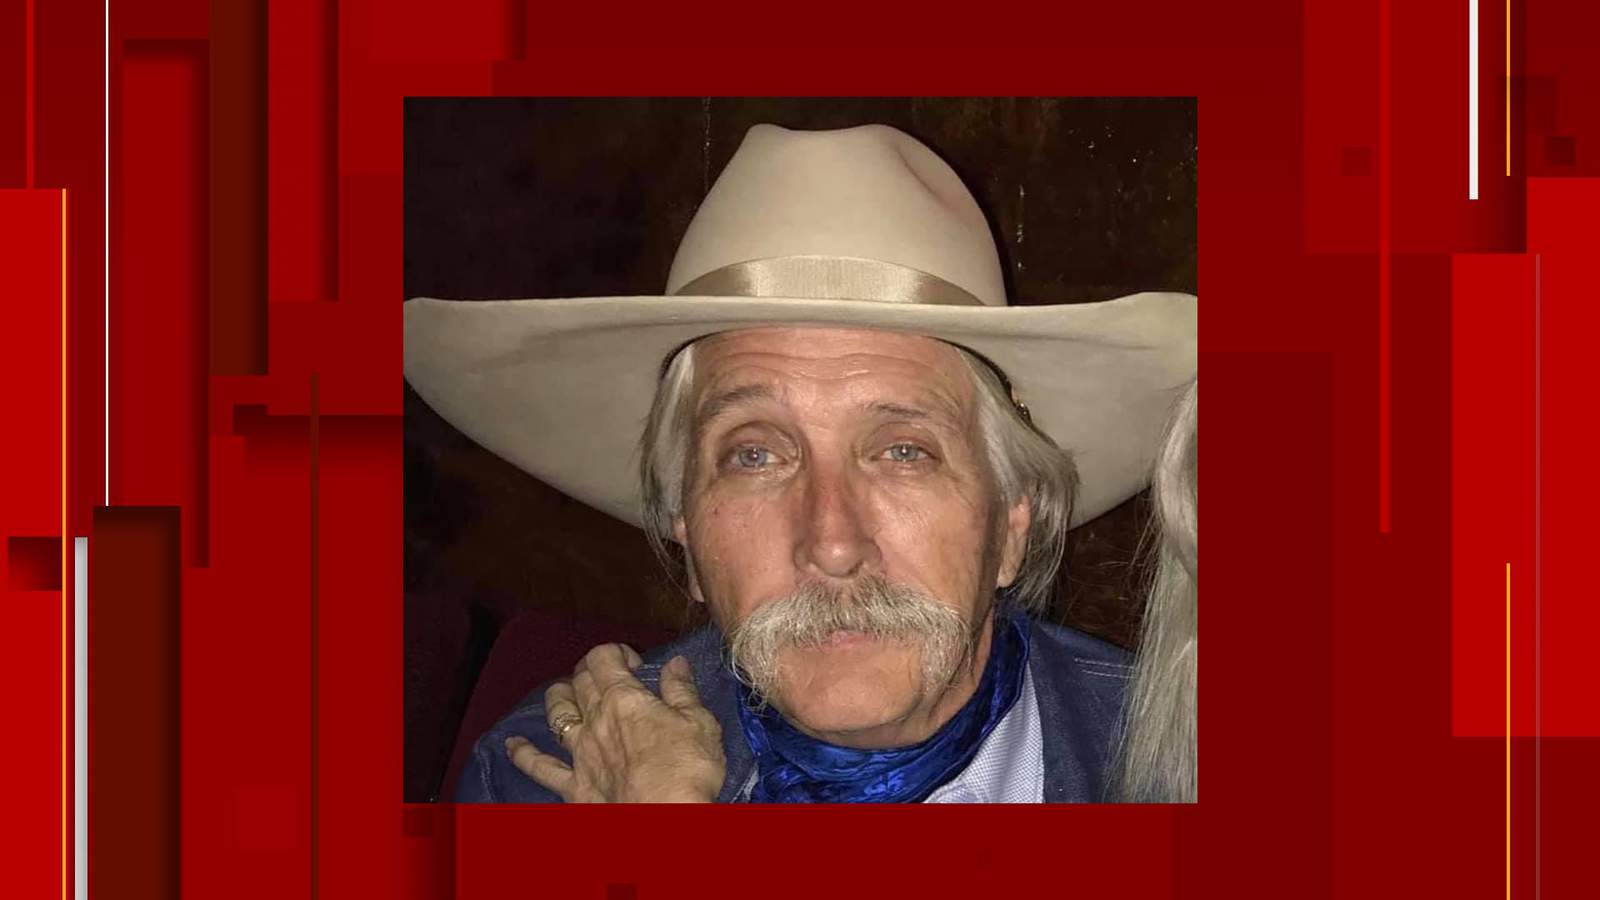 Comal County officials asking for public’s help in search for 65-year-old man